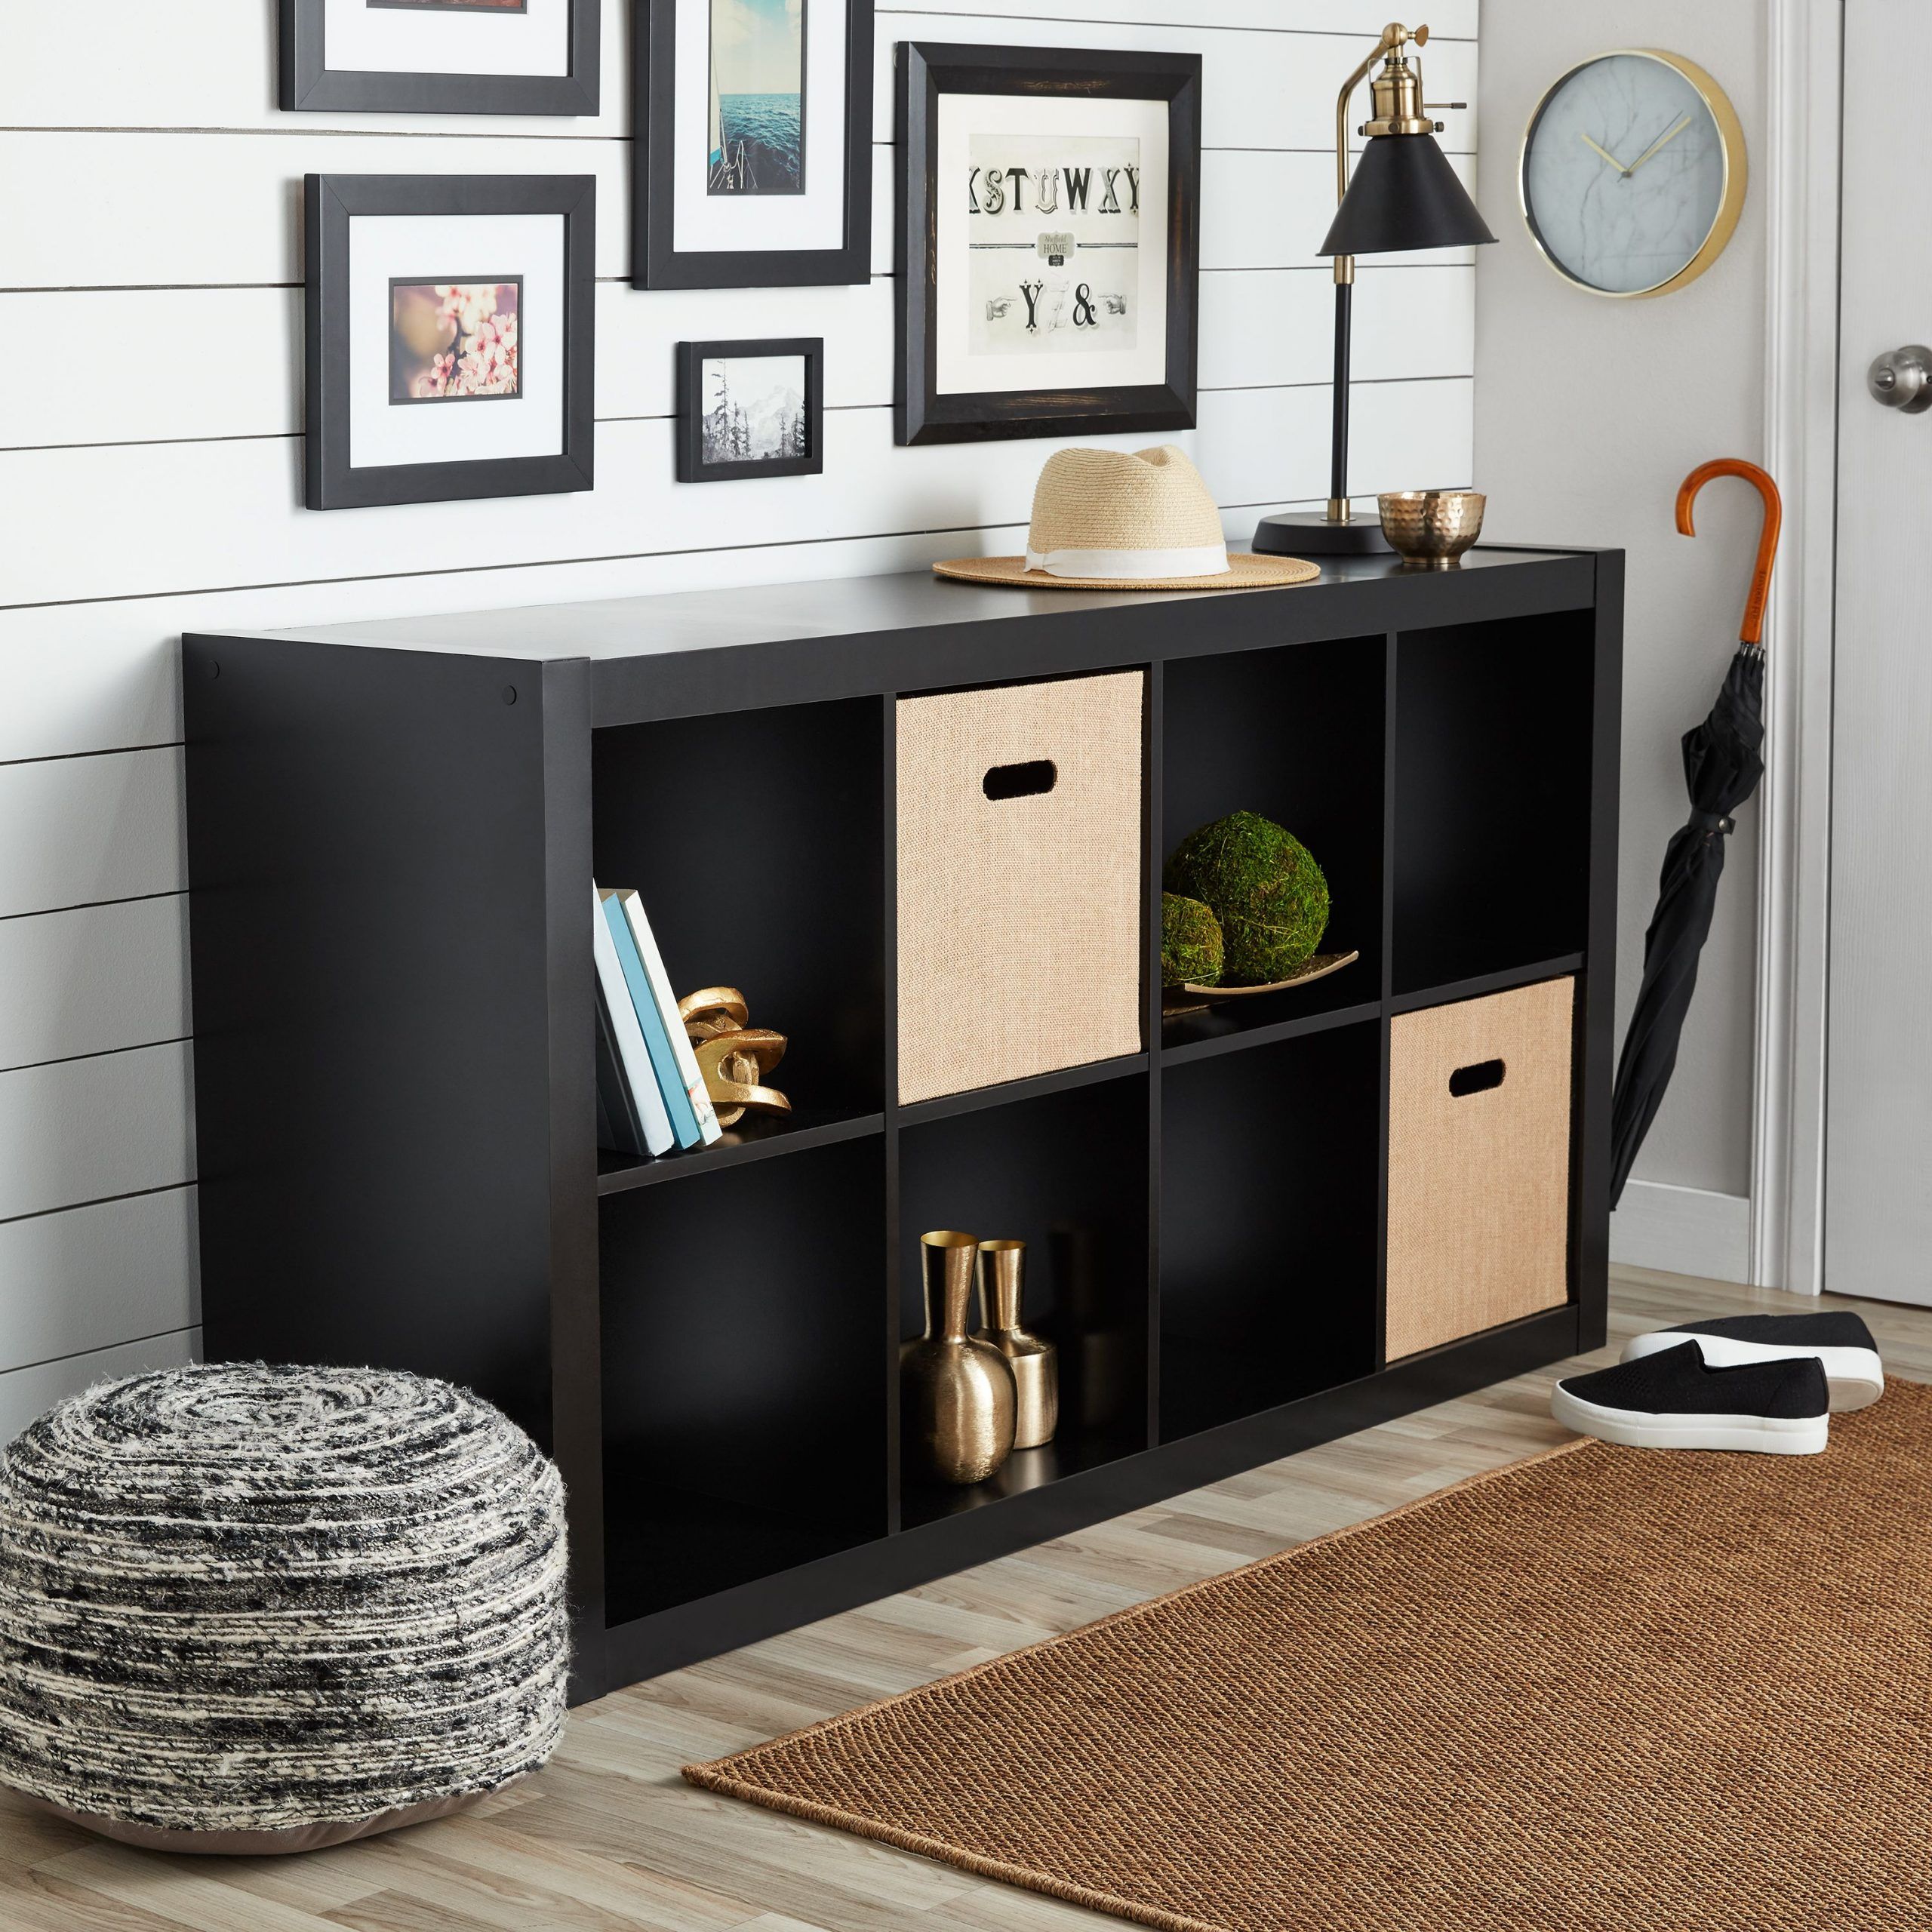 Better Homes & Gardens 8 Cube Organizer, Solid Black Throughout Mainstays 4 Cube Tv Stands In Multiple Finishes (View 2 of 15)